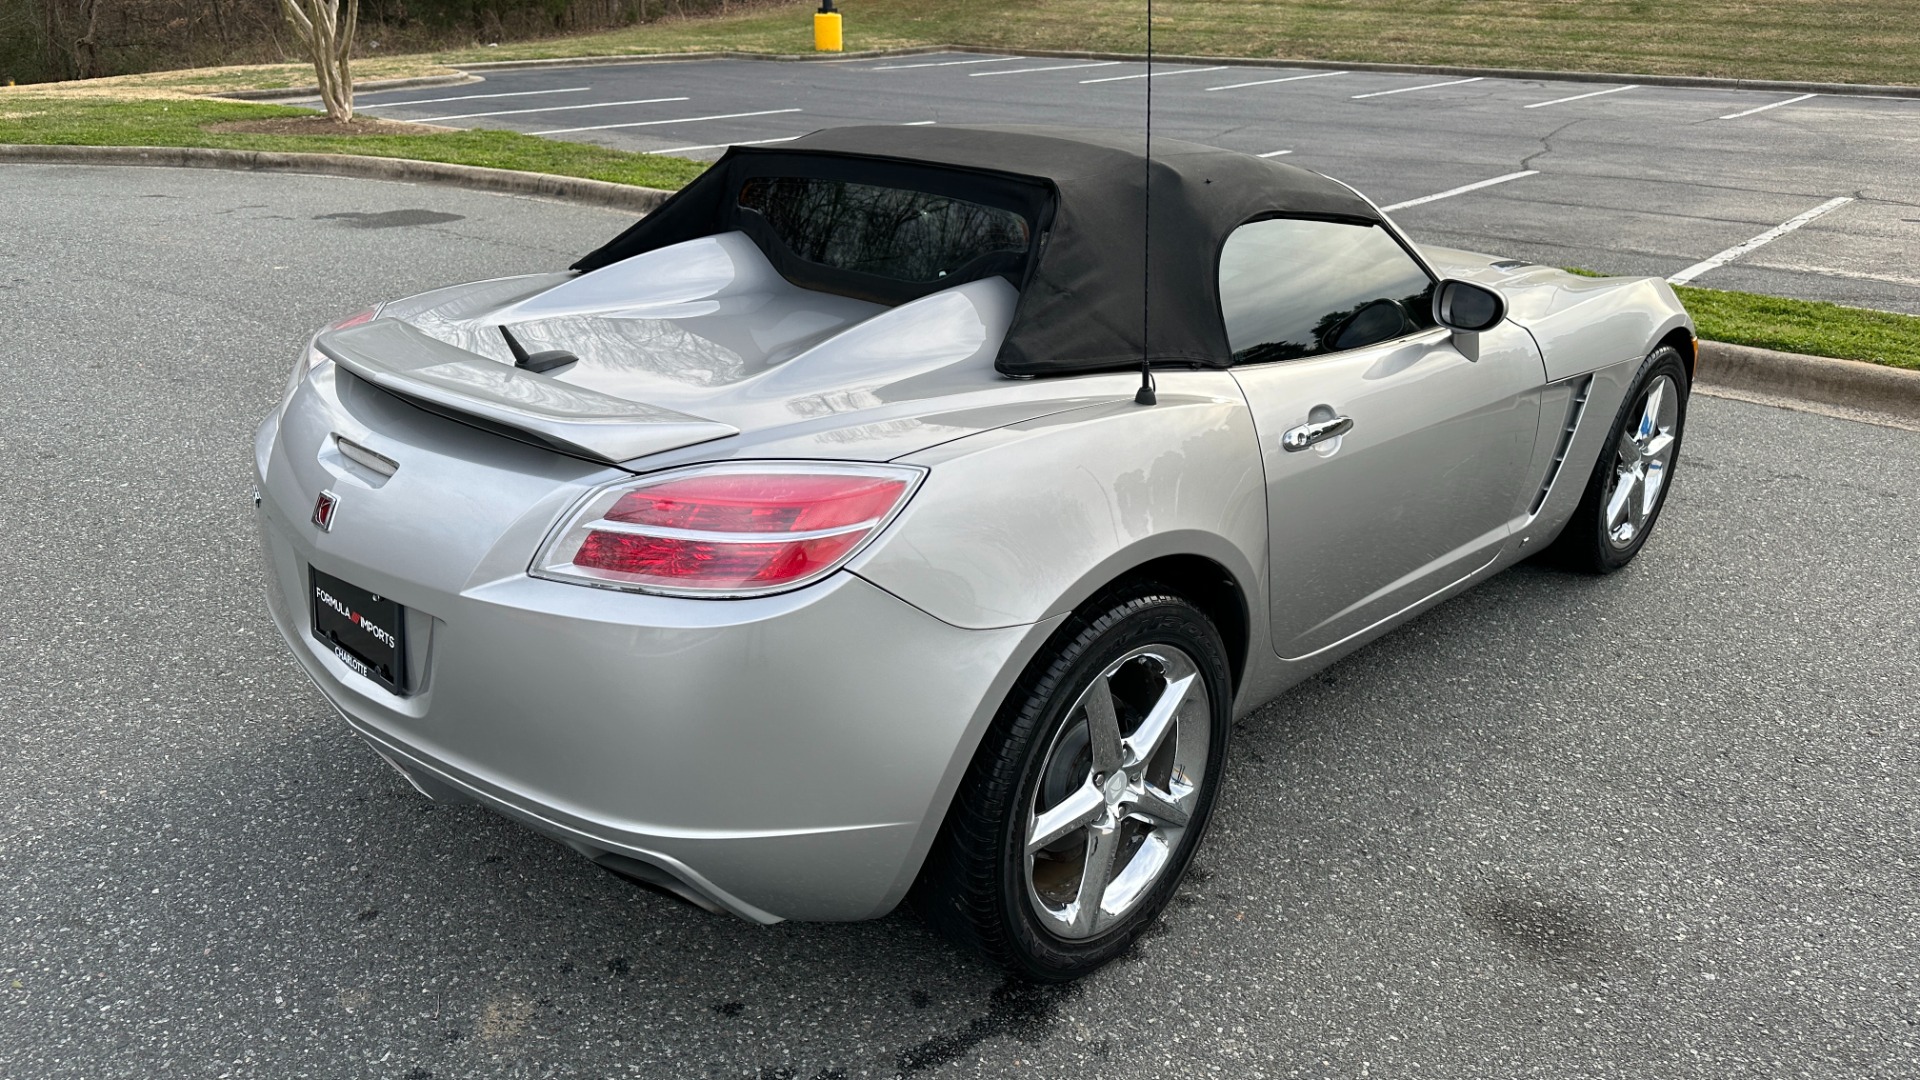 Used 2008 Saturn Sky CONVERTIBLE / MONSOON AUDIO / AUTOMATIC / PREMIUM TRIM / SPOILER for sale Sold at Formula Imports in Charlotte NC 28227 10